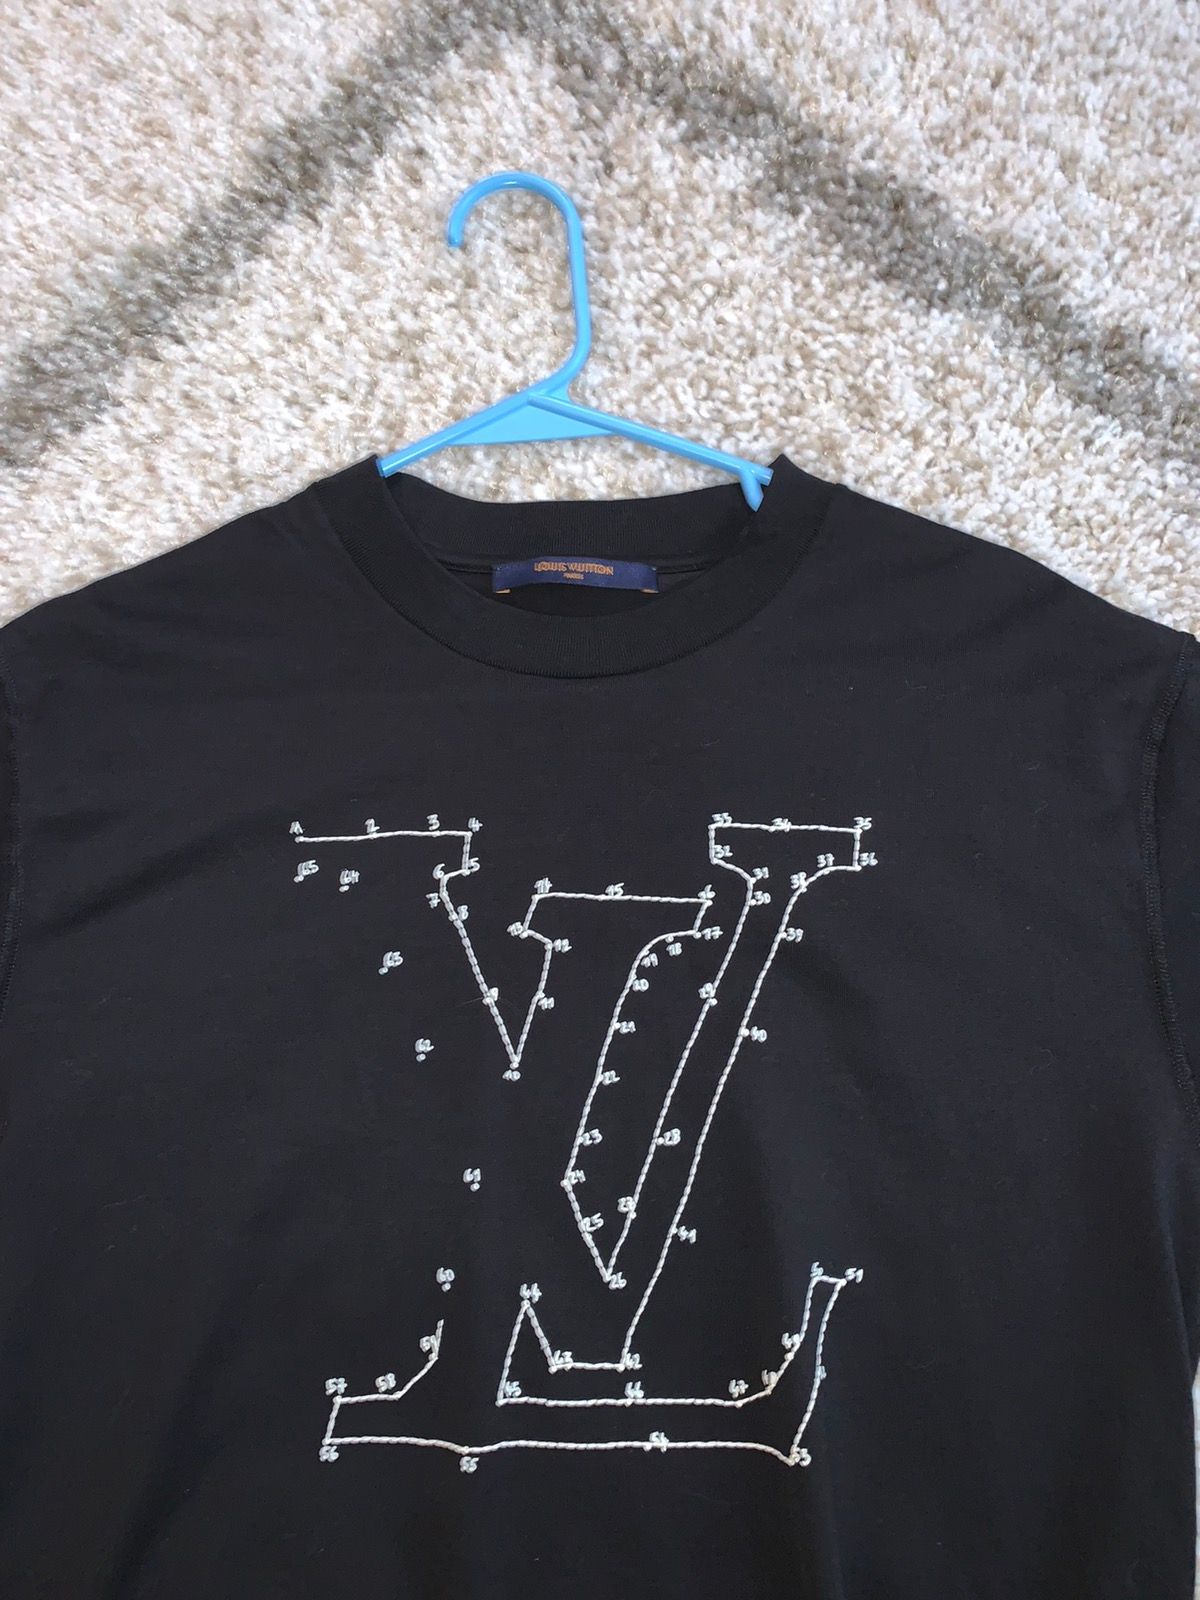 Louis Vuitton LV Stitch Print and Embroidered T-shirt